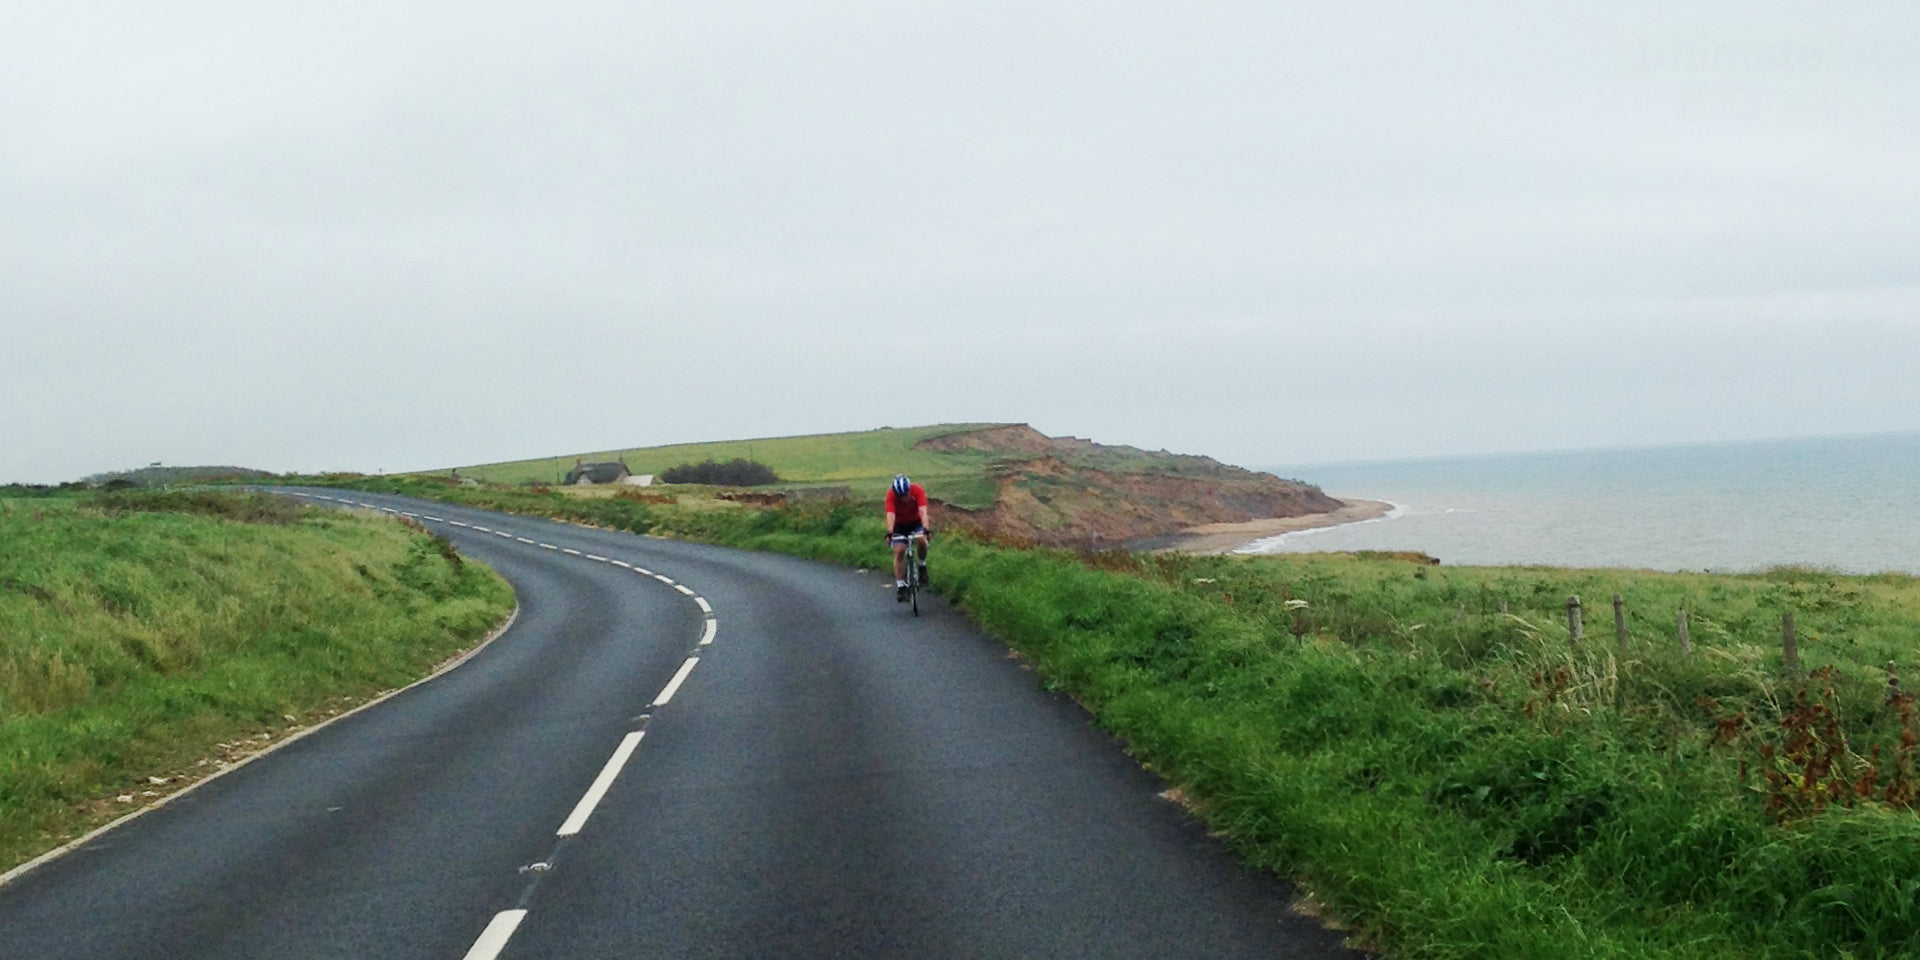 Isle of Wight cycling on a road banner